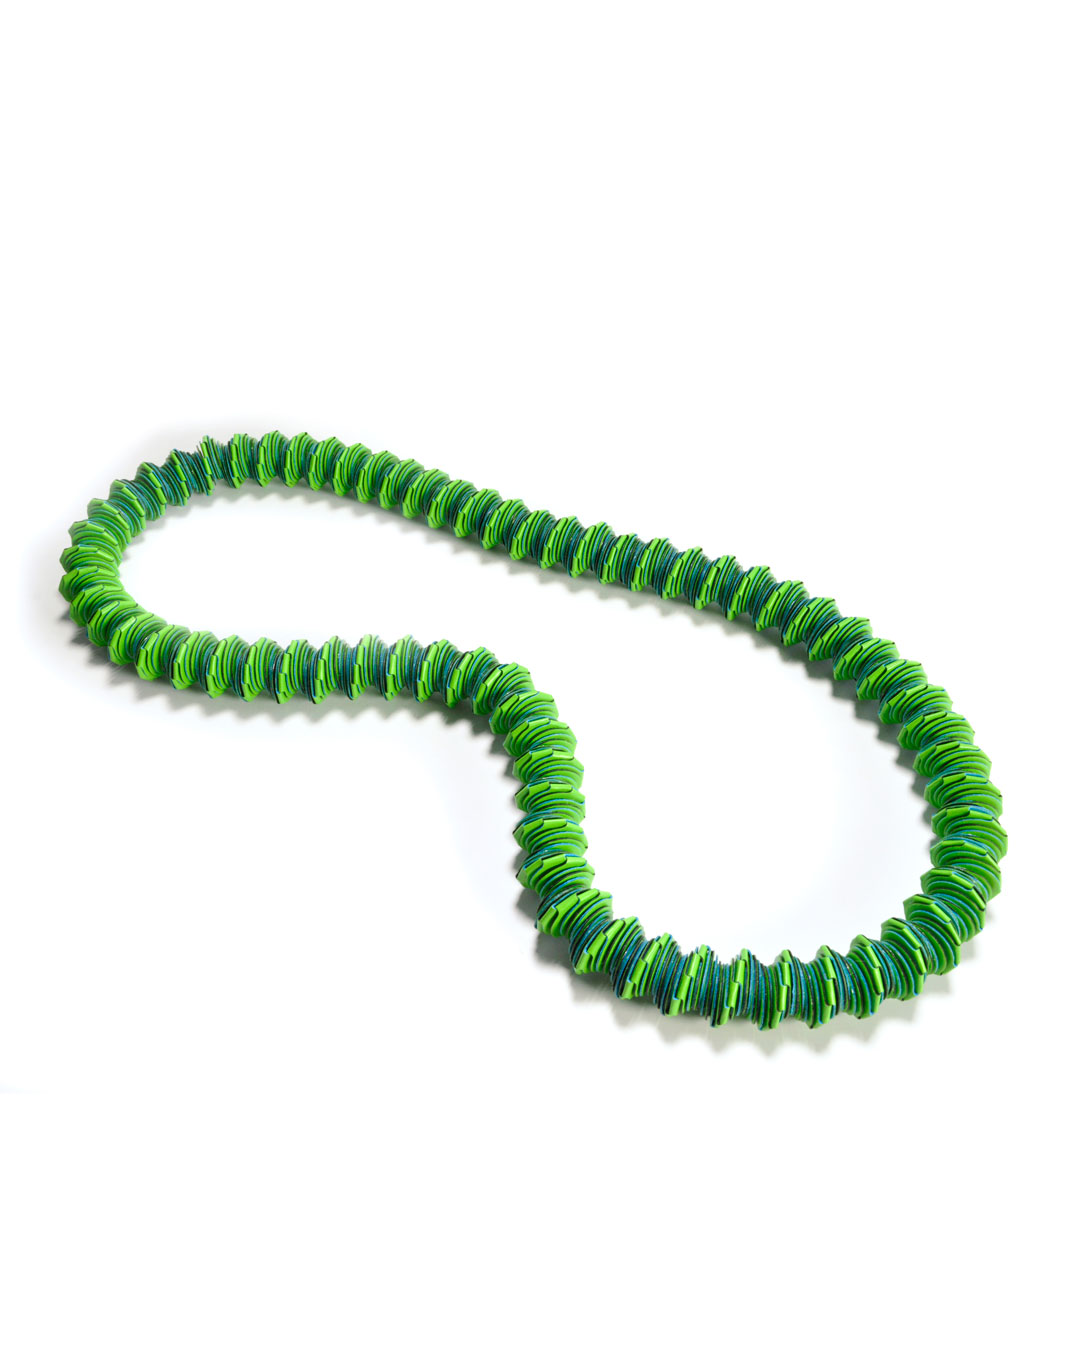 Nel Linssen, untitled, 1999, necklace; plastic-coated paper, 350 x 150 x 20 mm, €950